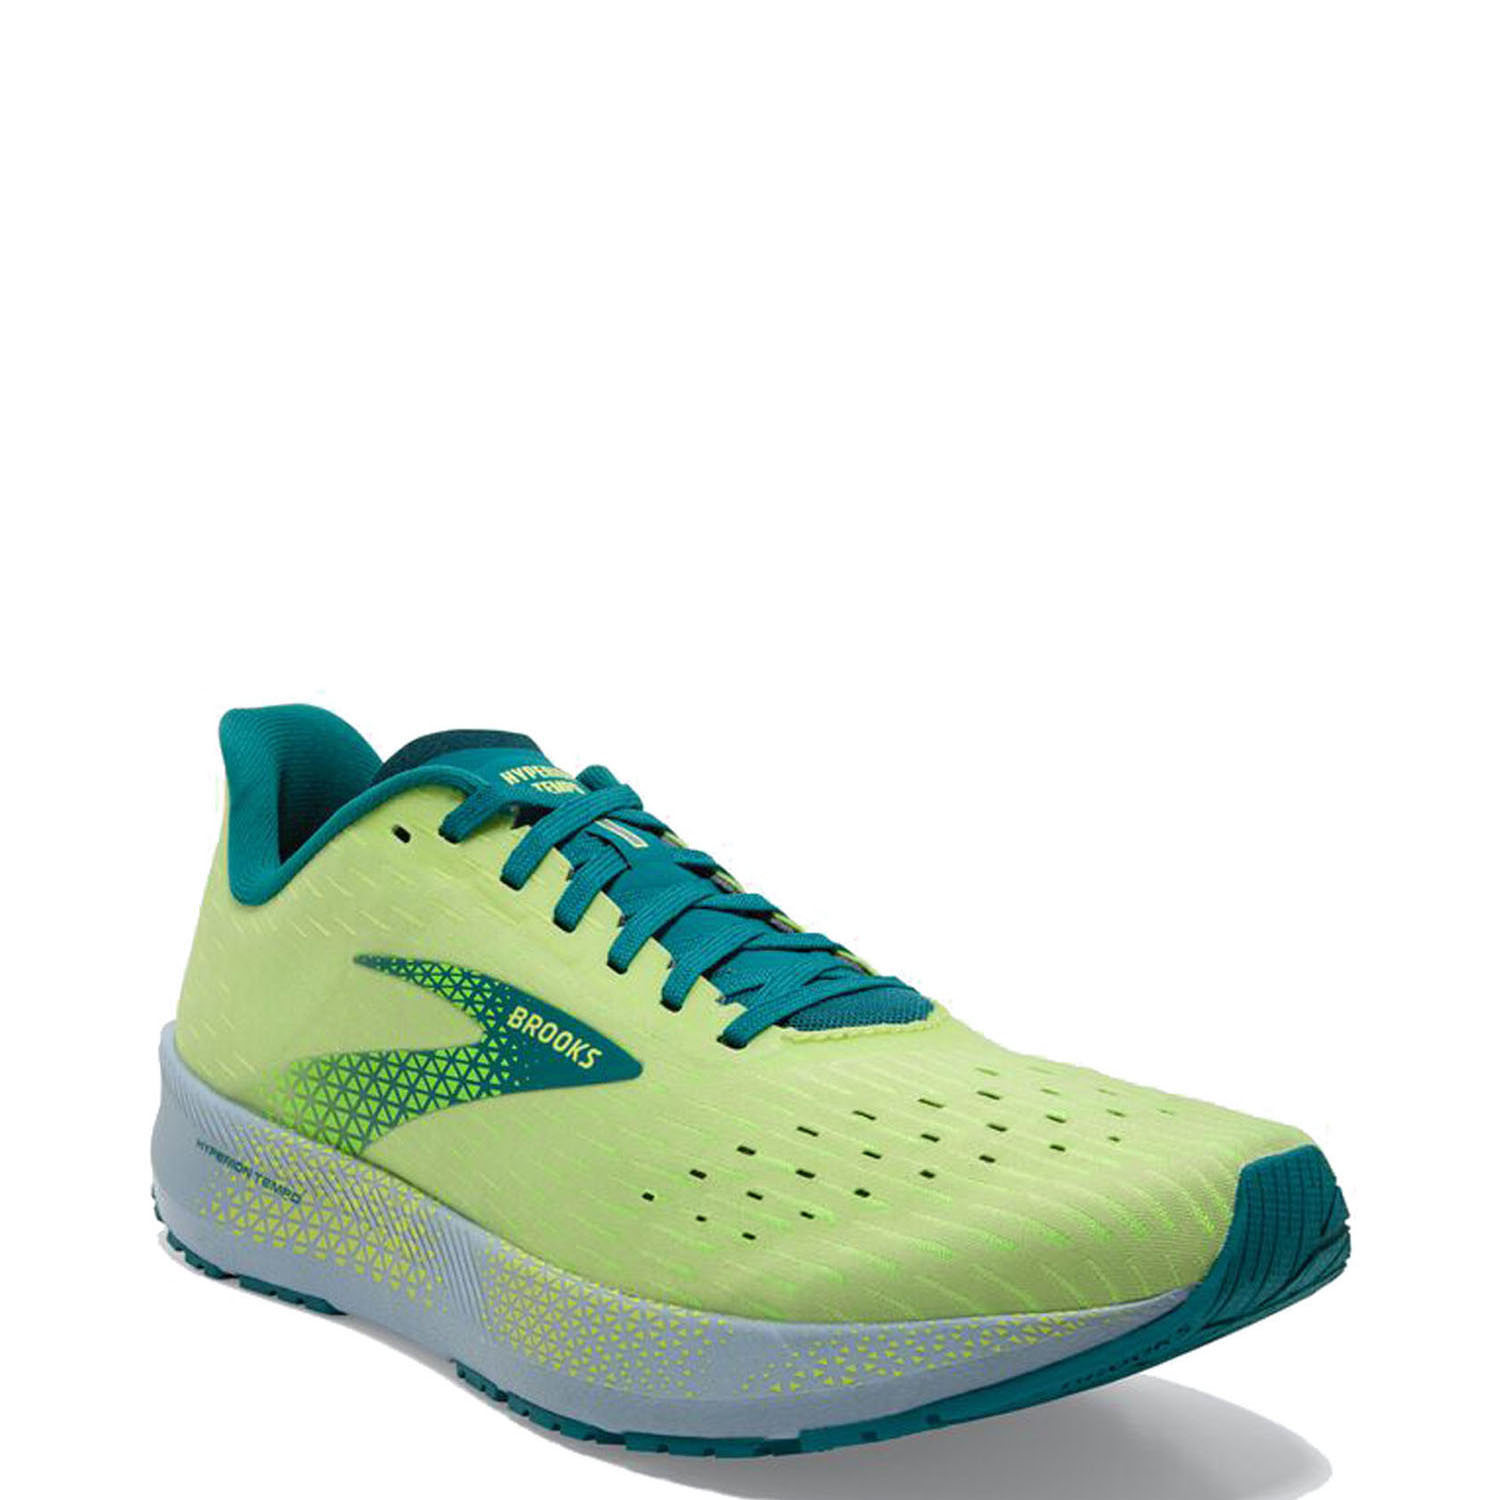 Кроссовки BROOKS Hyperion Tempo Green/Kayaking/Dusty Blue